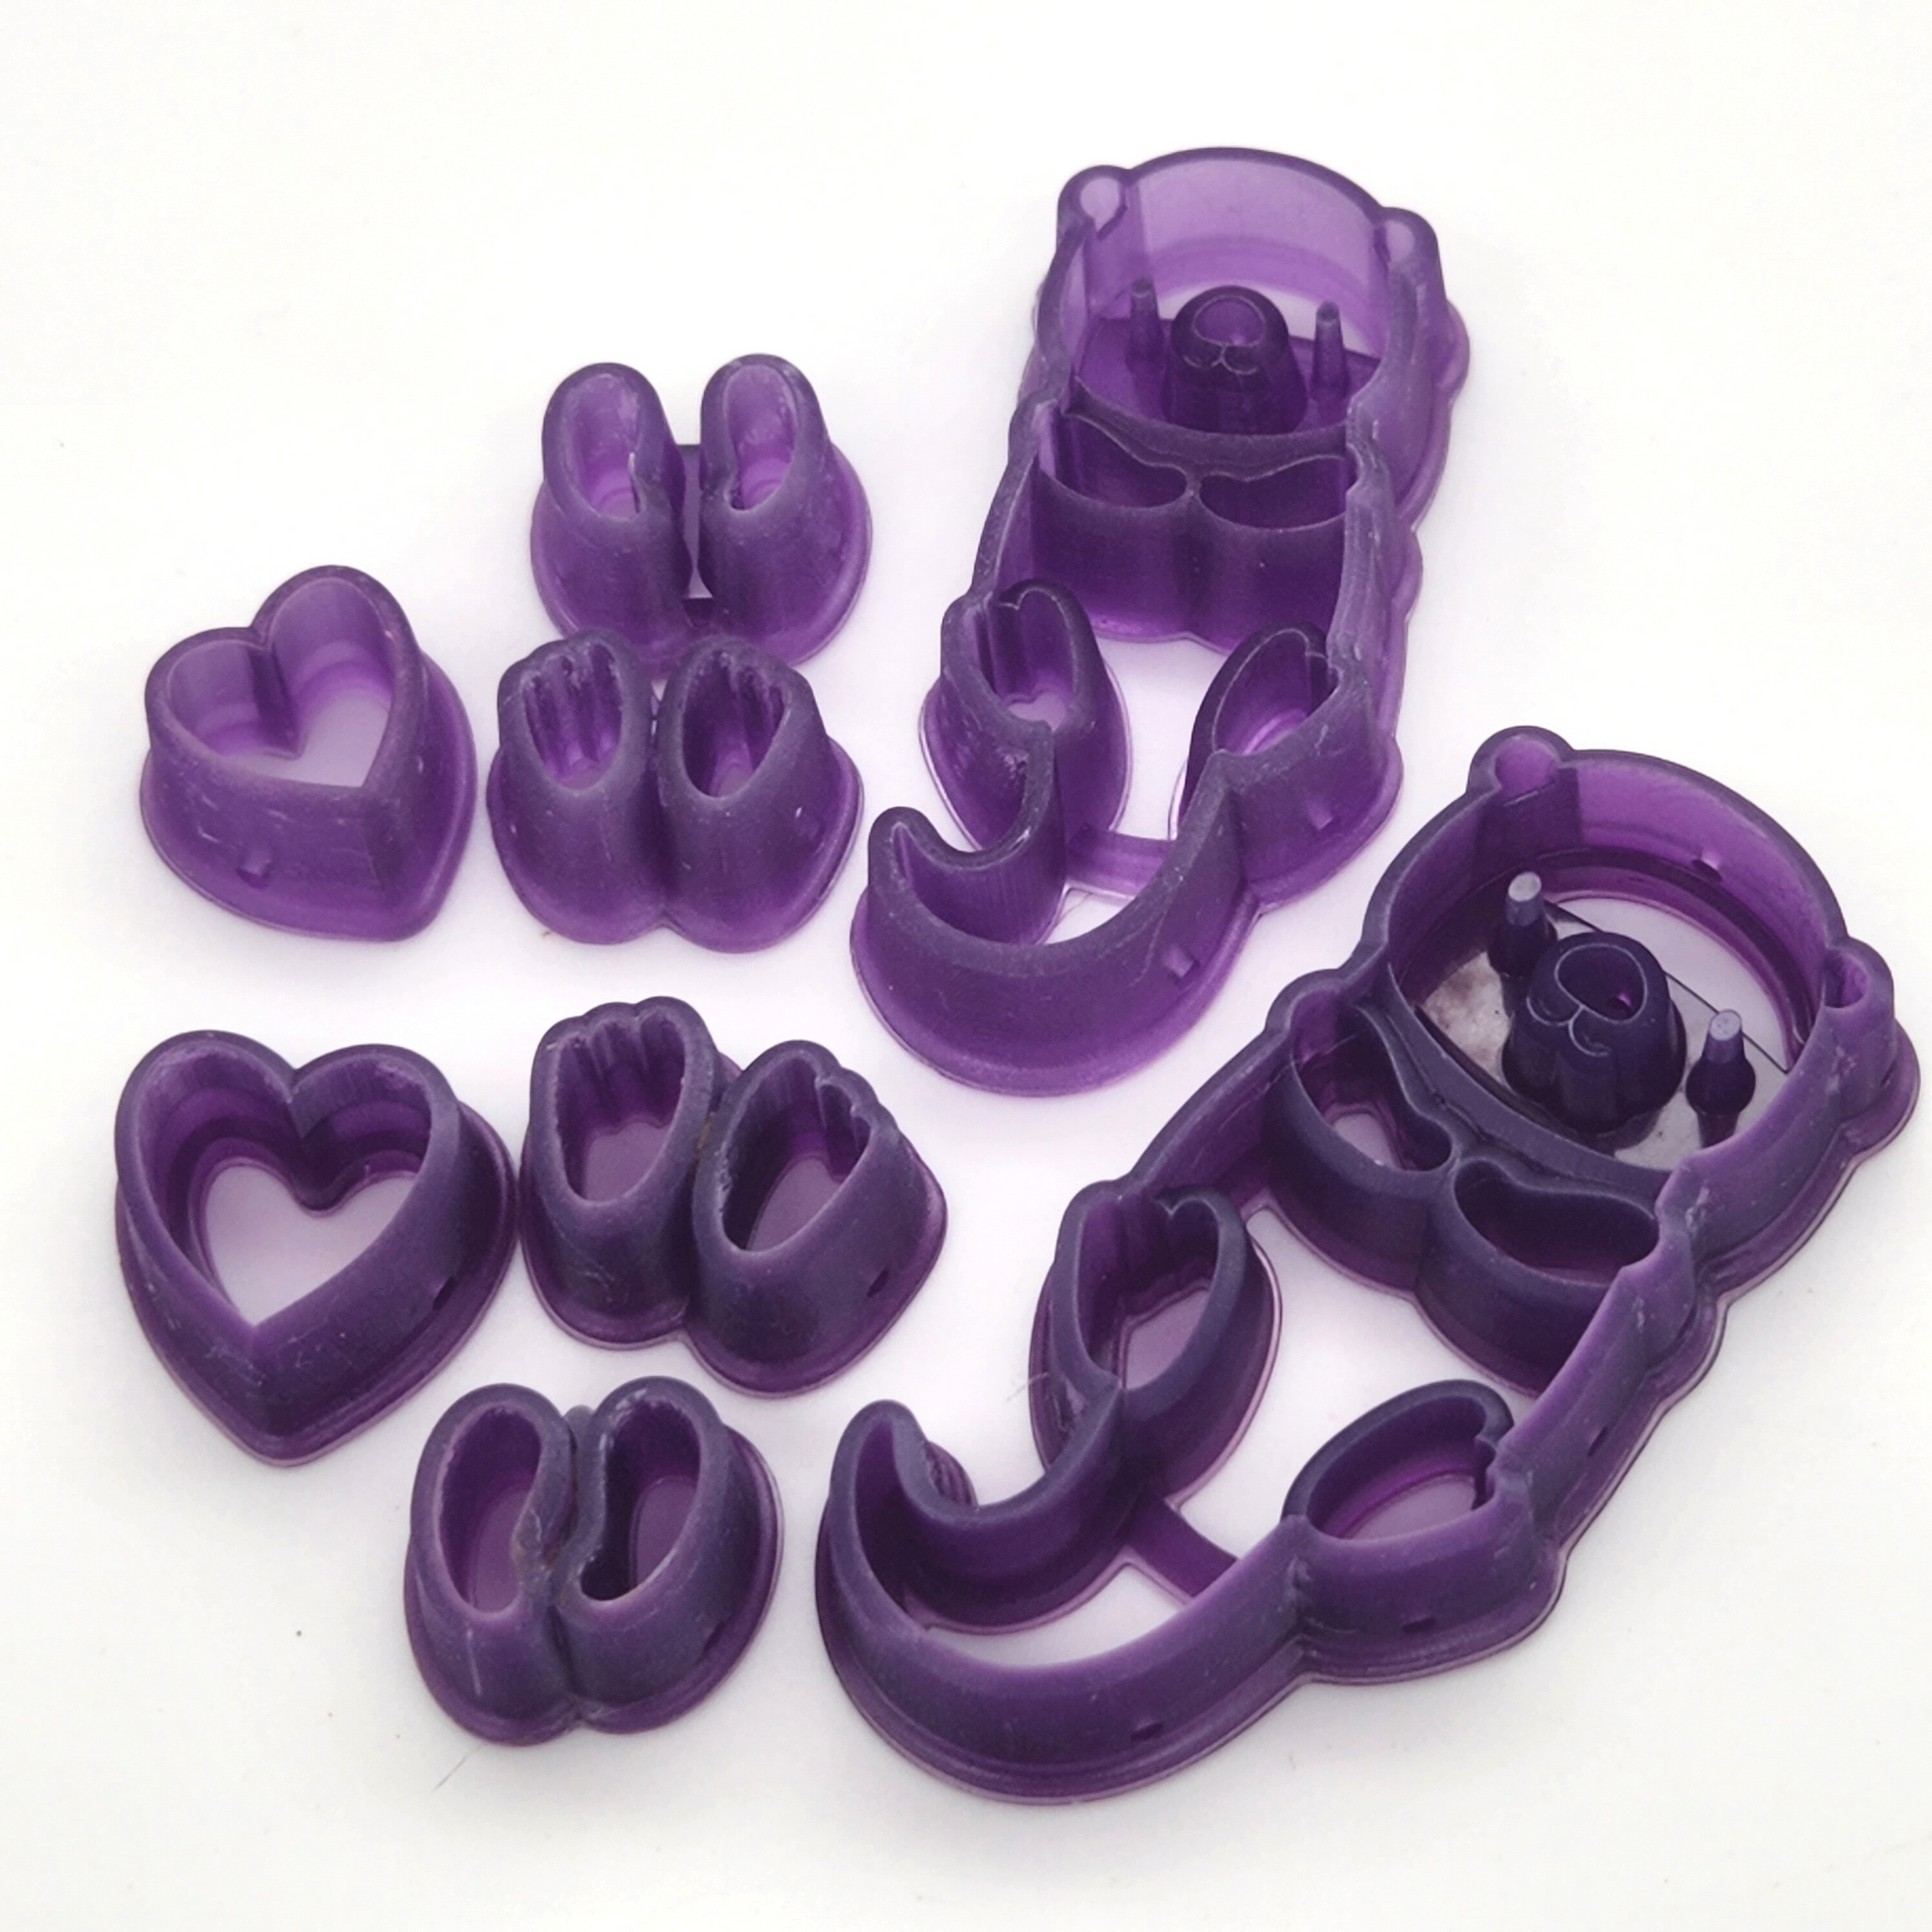 Sharp Edged 3D Printed Otter Love resin clay cutter set including Otter, heart, a double-paws cutter, and a double-flipper cutter in different sizes, close up angle to show details